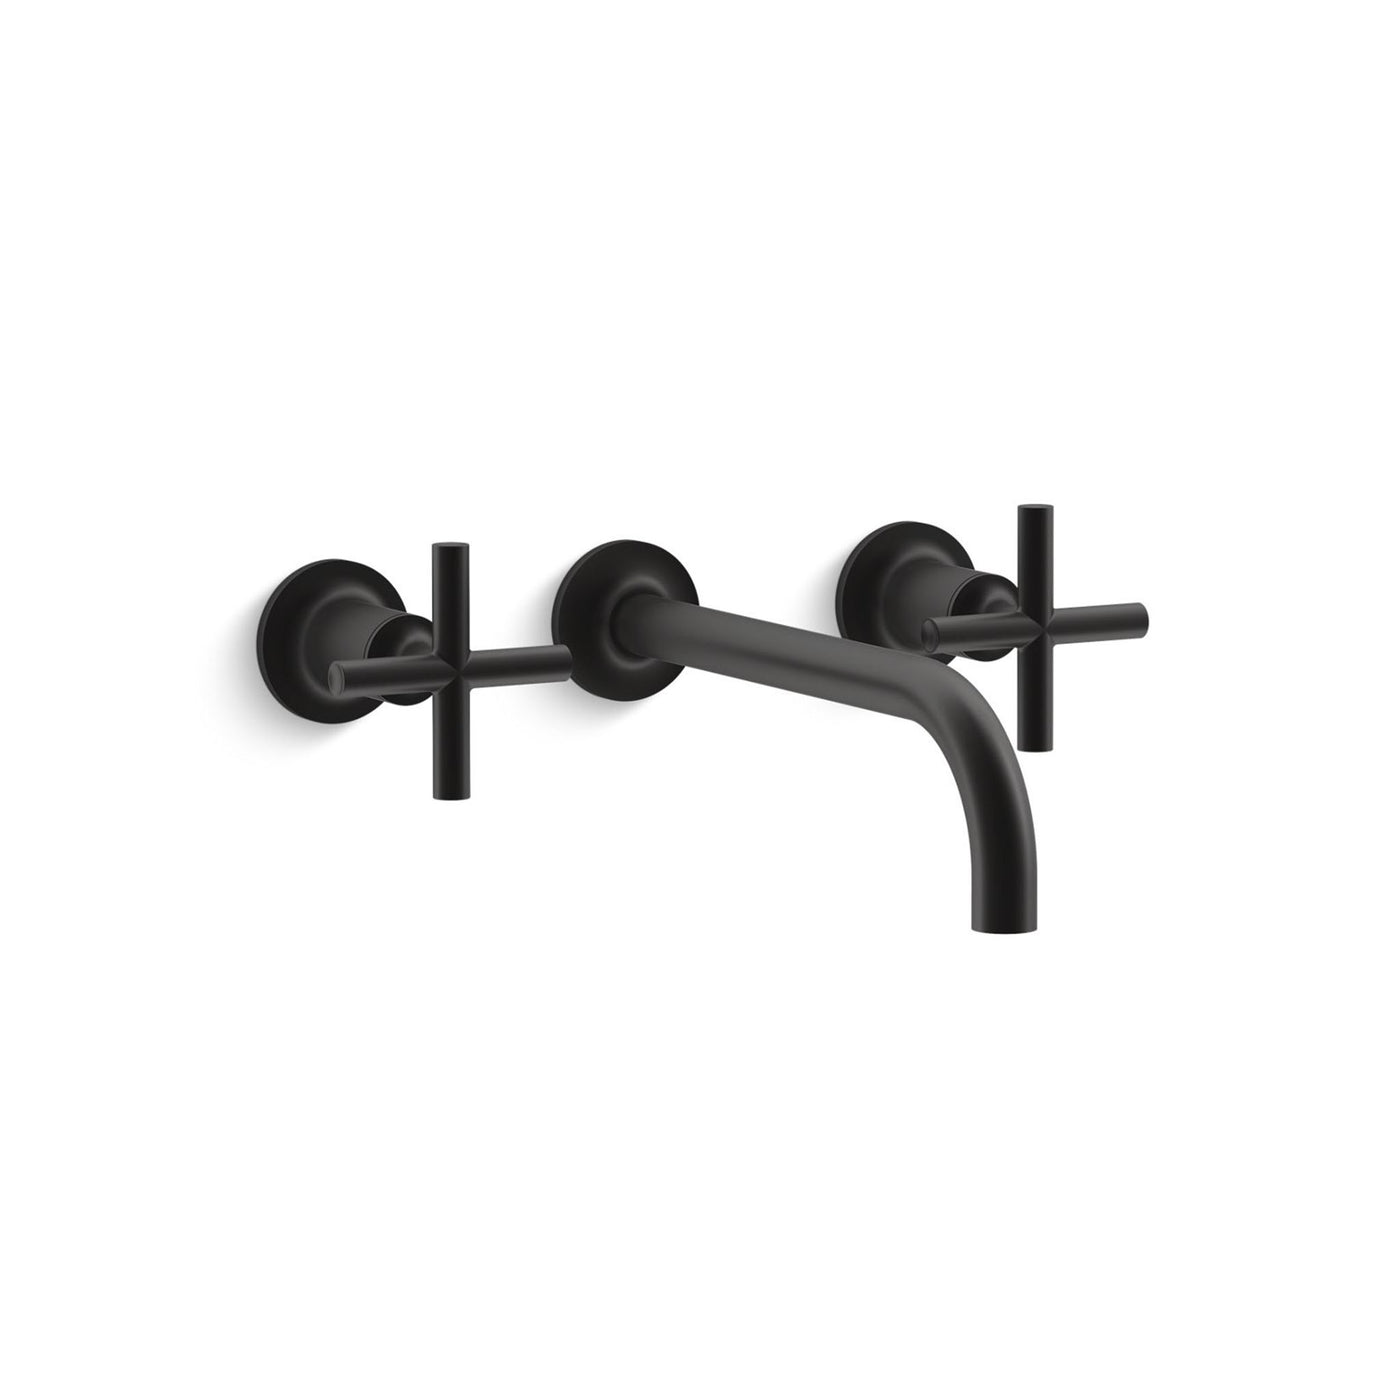 Purist® Widespread wall-mount bathroom sink faucet trim with cross handles, 1.2 gpm